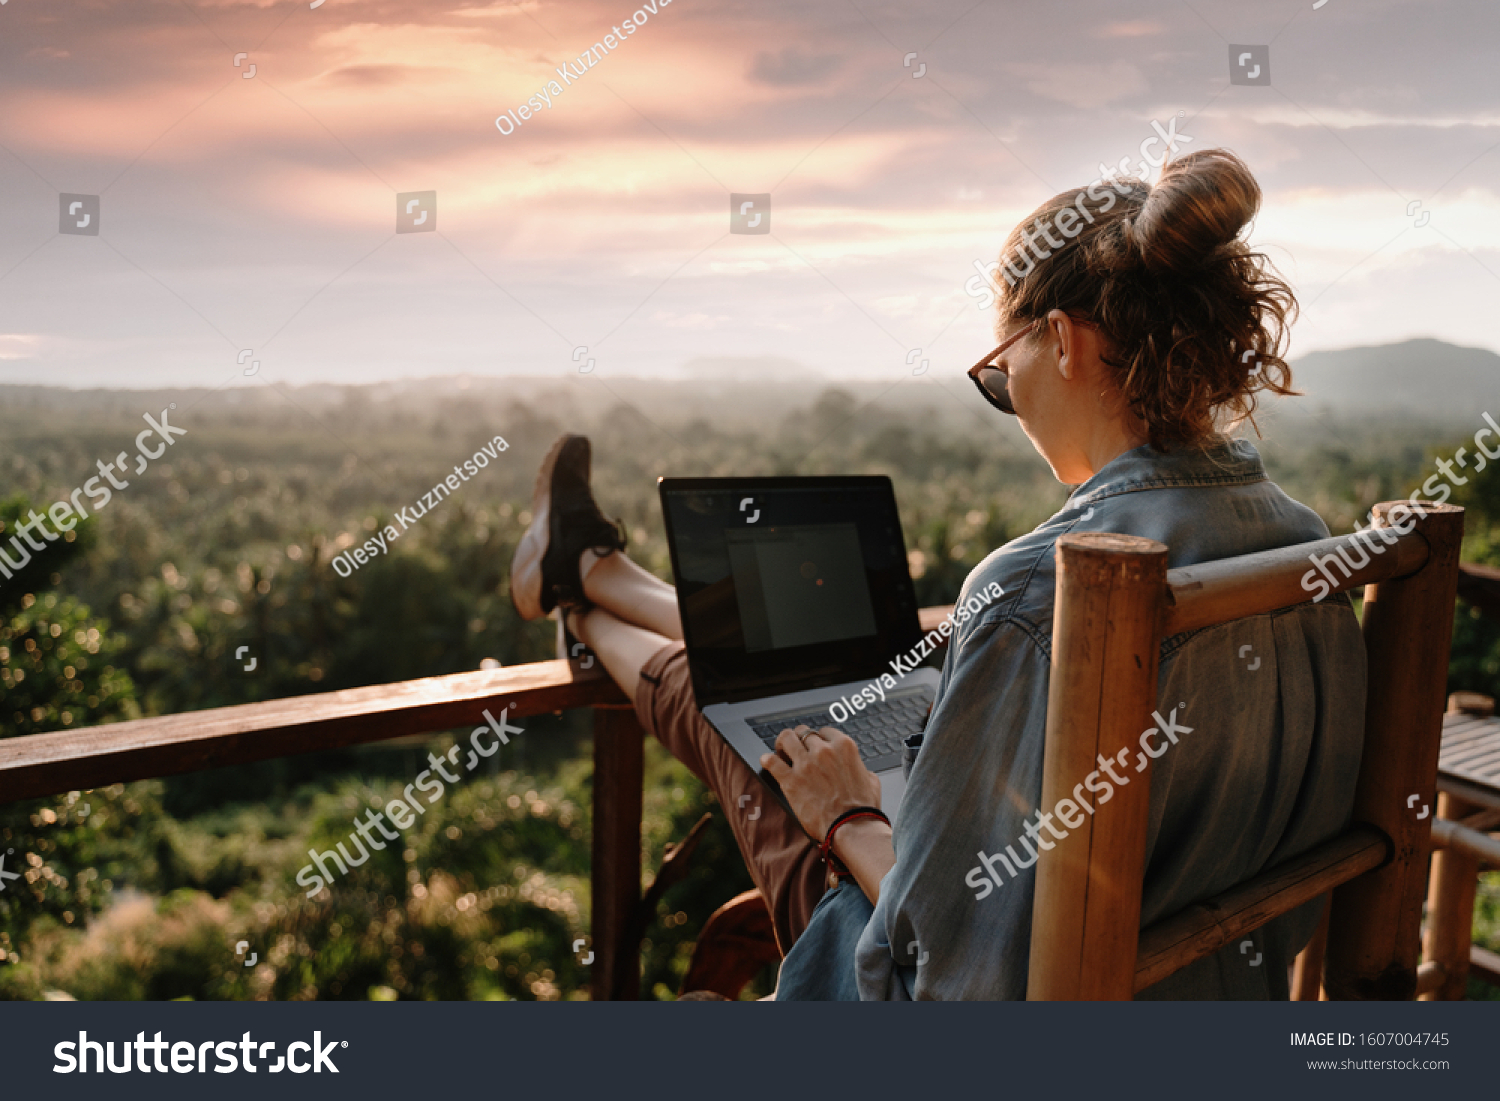 Young business woman working at the computer in cafe on the rock. Young girl downshifter working at a laptop at sunset or sunrise on the top of the mountain to the sea, working day.